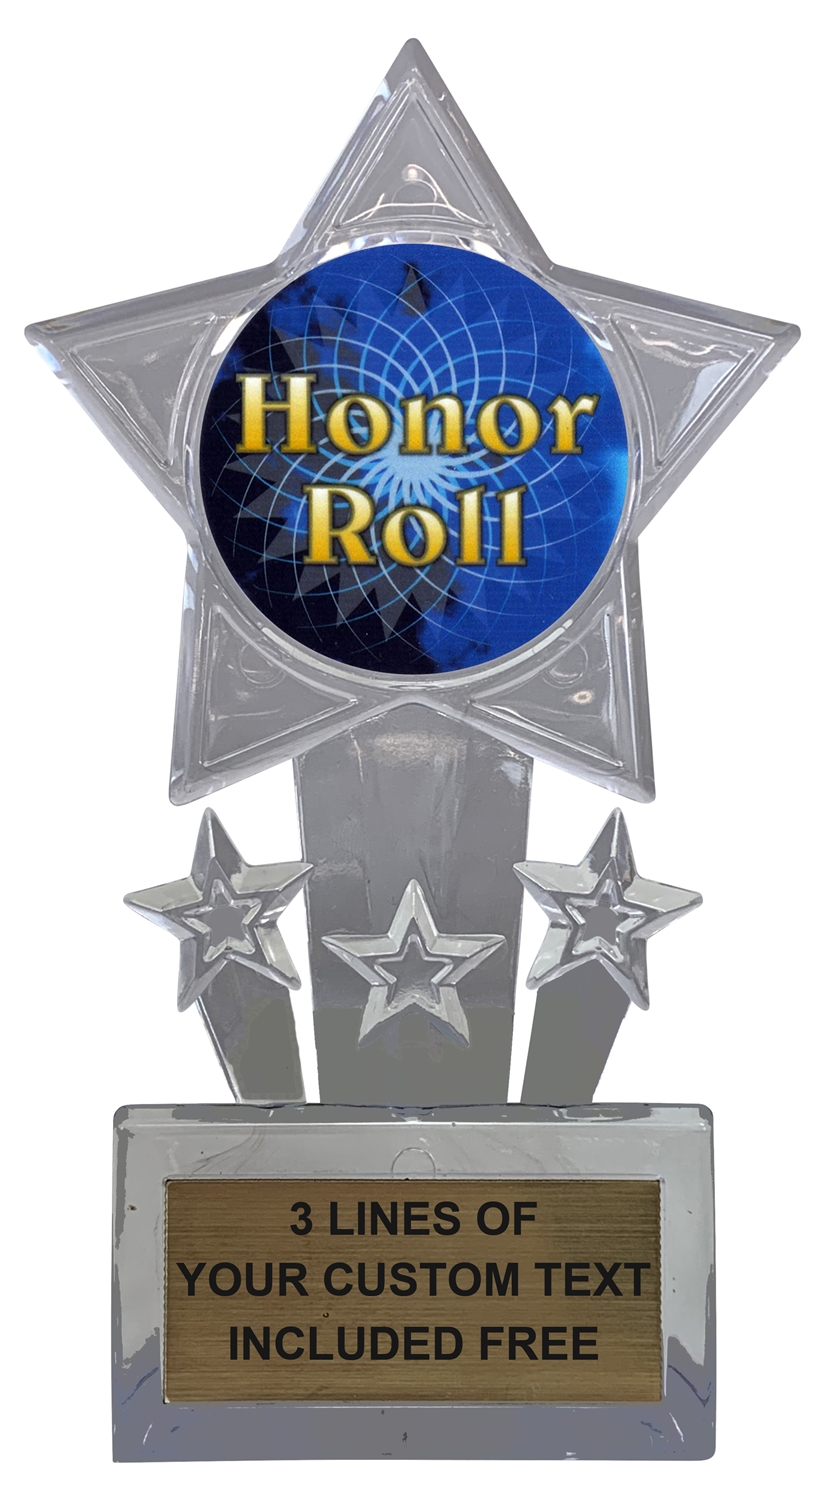 Express Medals 6 x 8 Walnut Finish Basketball Star Plaque Trophy Award with Custom Engraved Personalized Text 